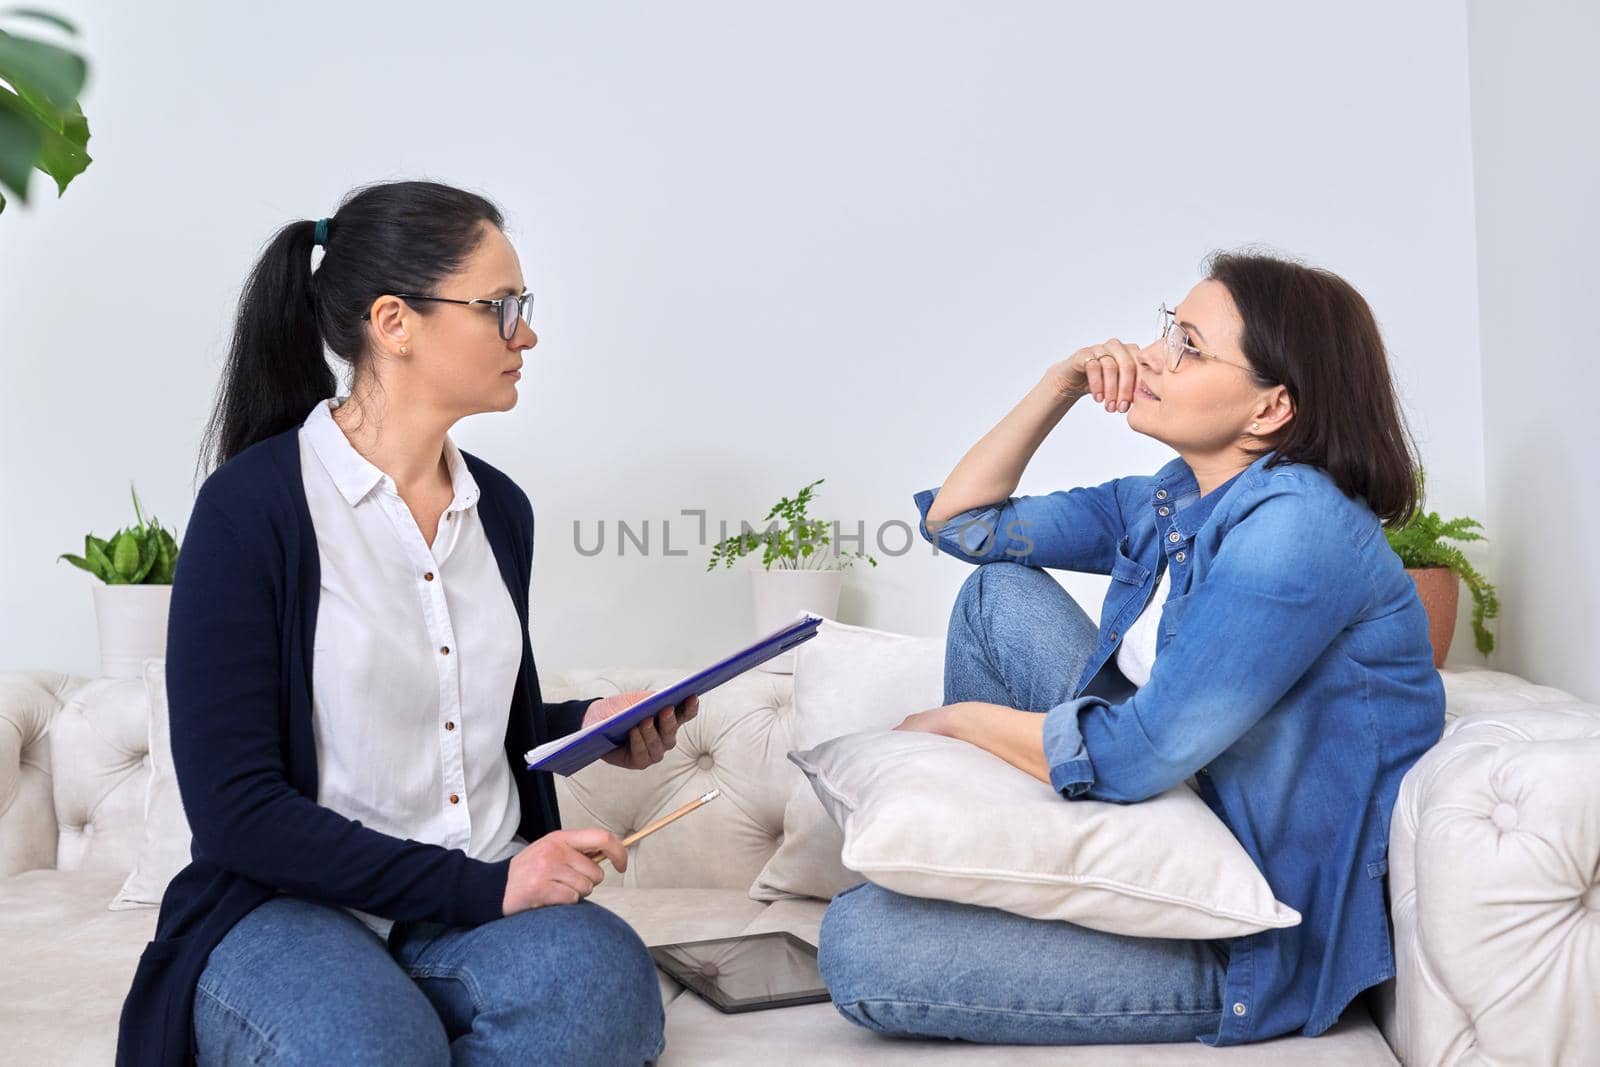 Mature woman at meeting with psychologist, therapist, counselor by VH-studio